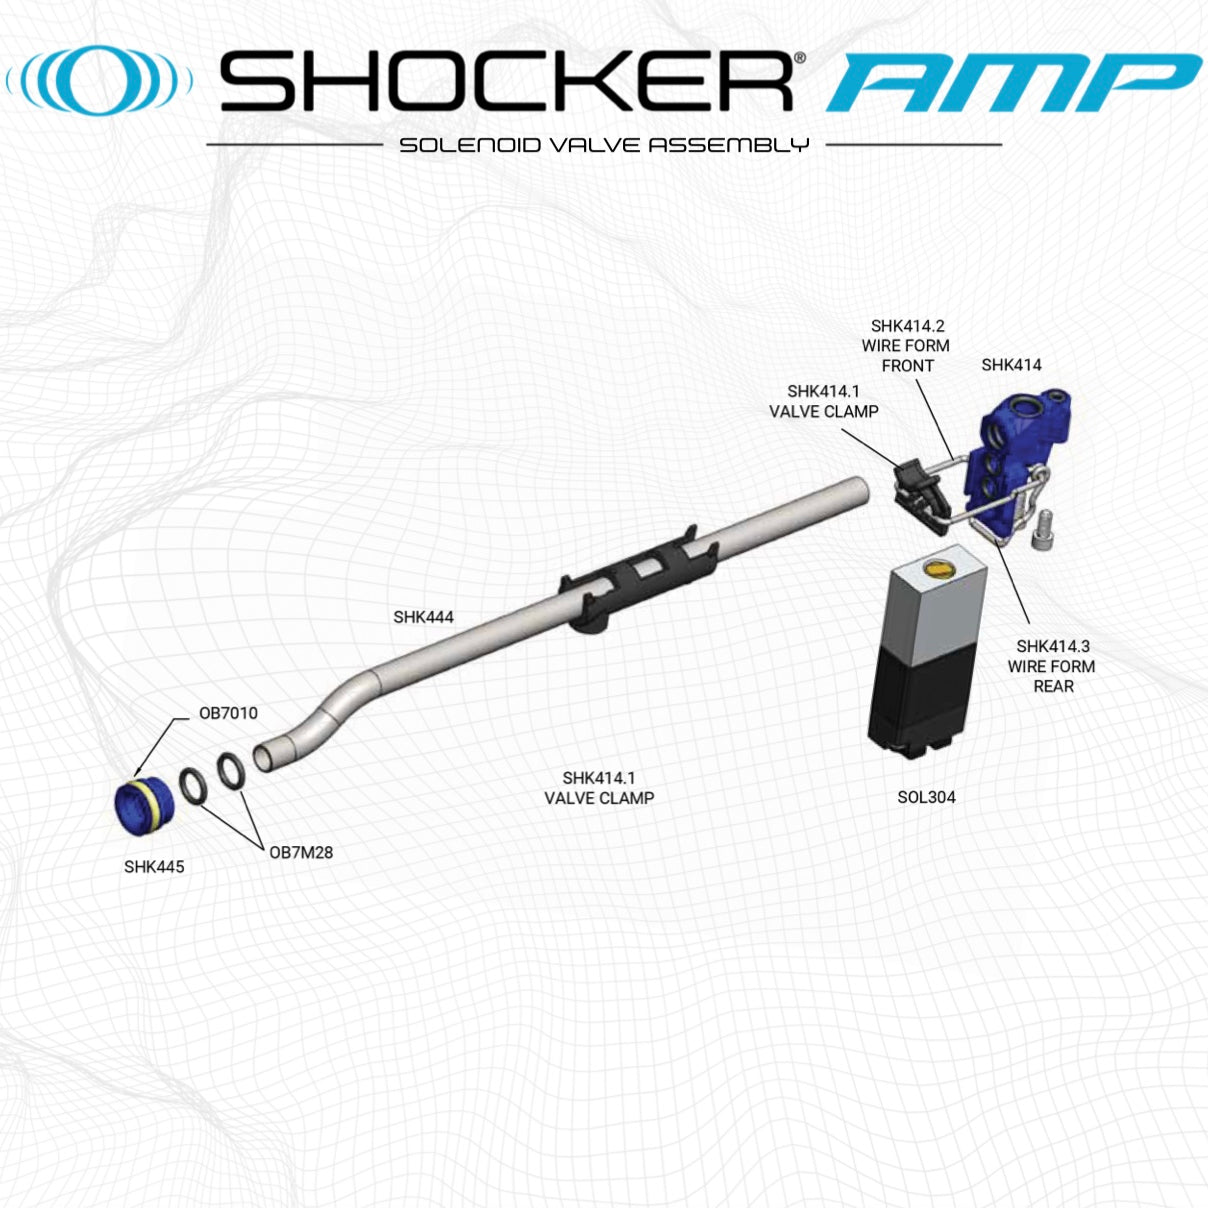 SP Shocker Amp Solenoid Valve Assembly Parts List - Pick the Part You Need!